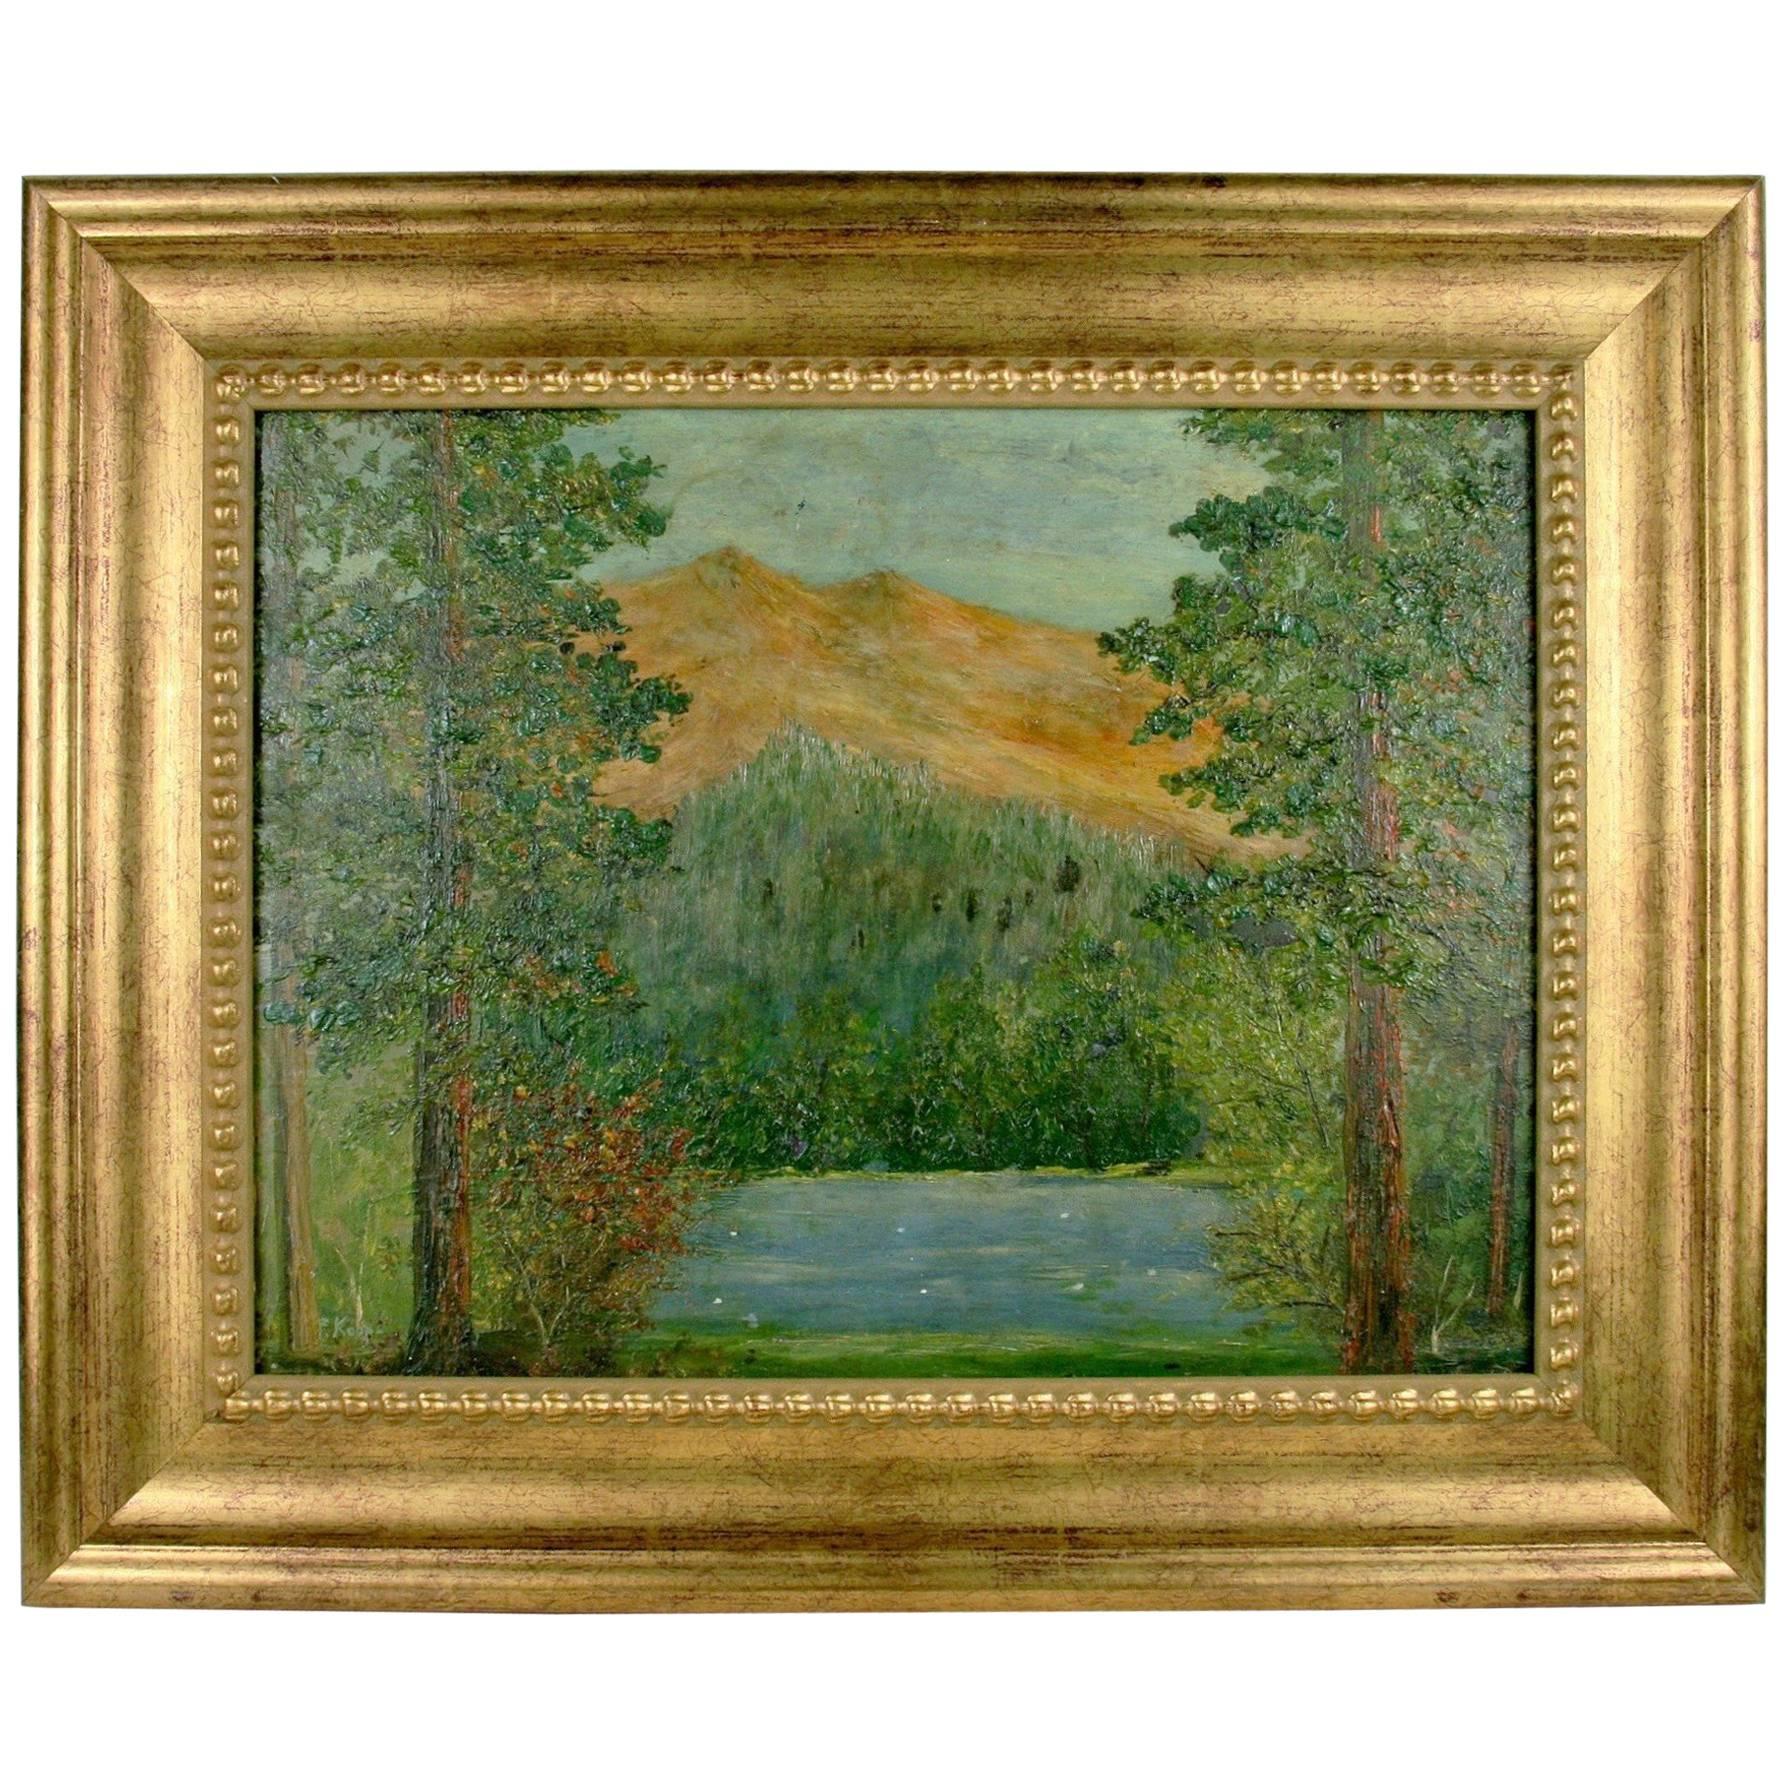 Impressionist Landscape Painting by F. Koops